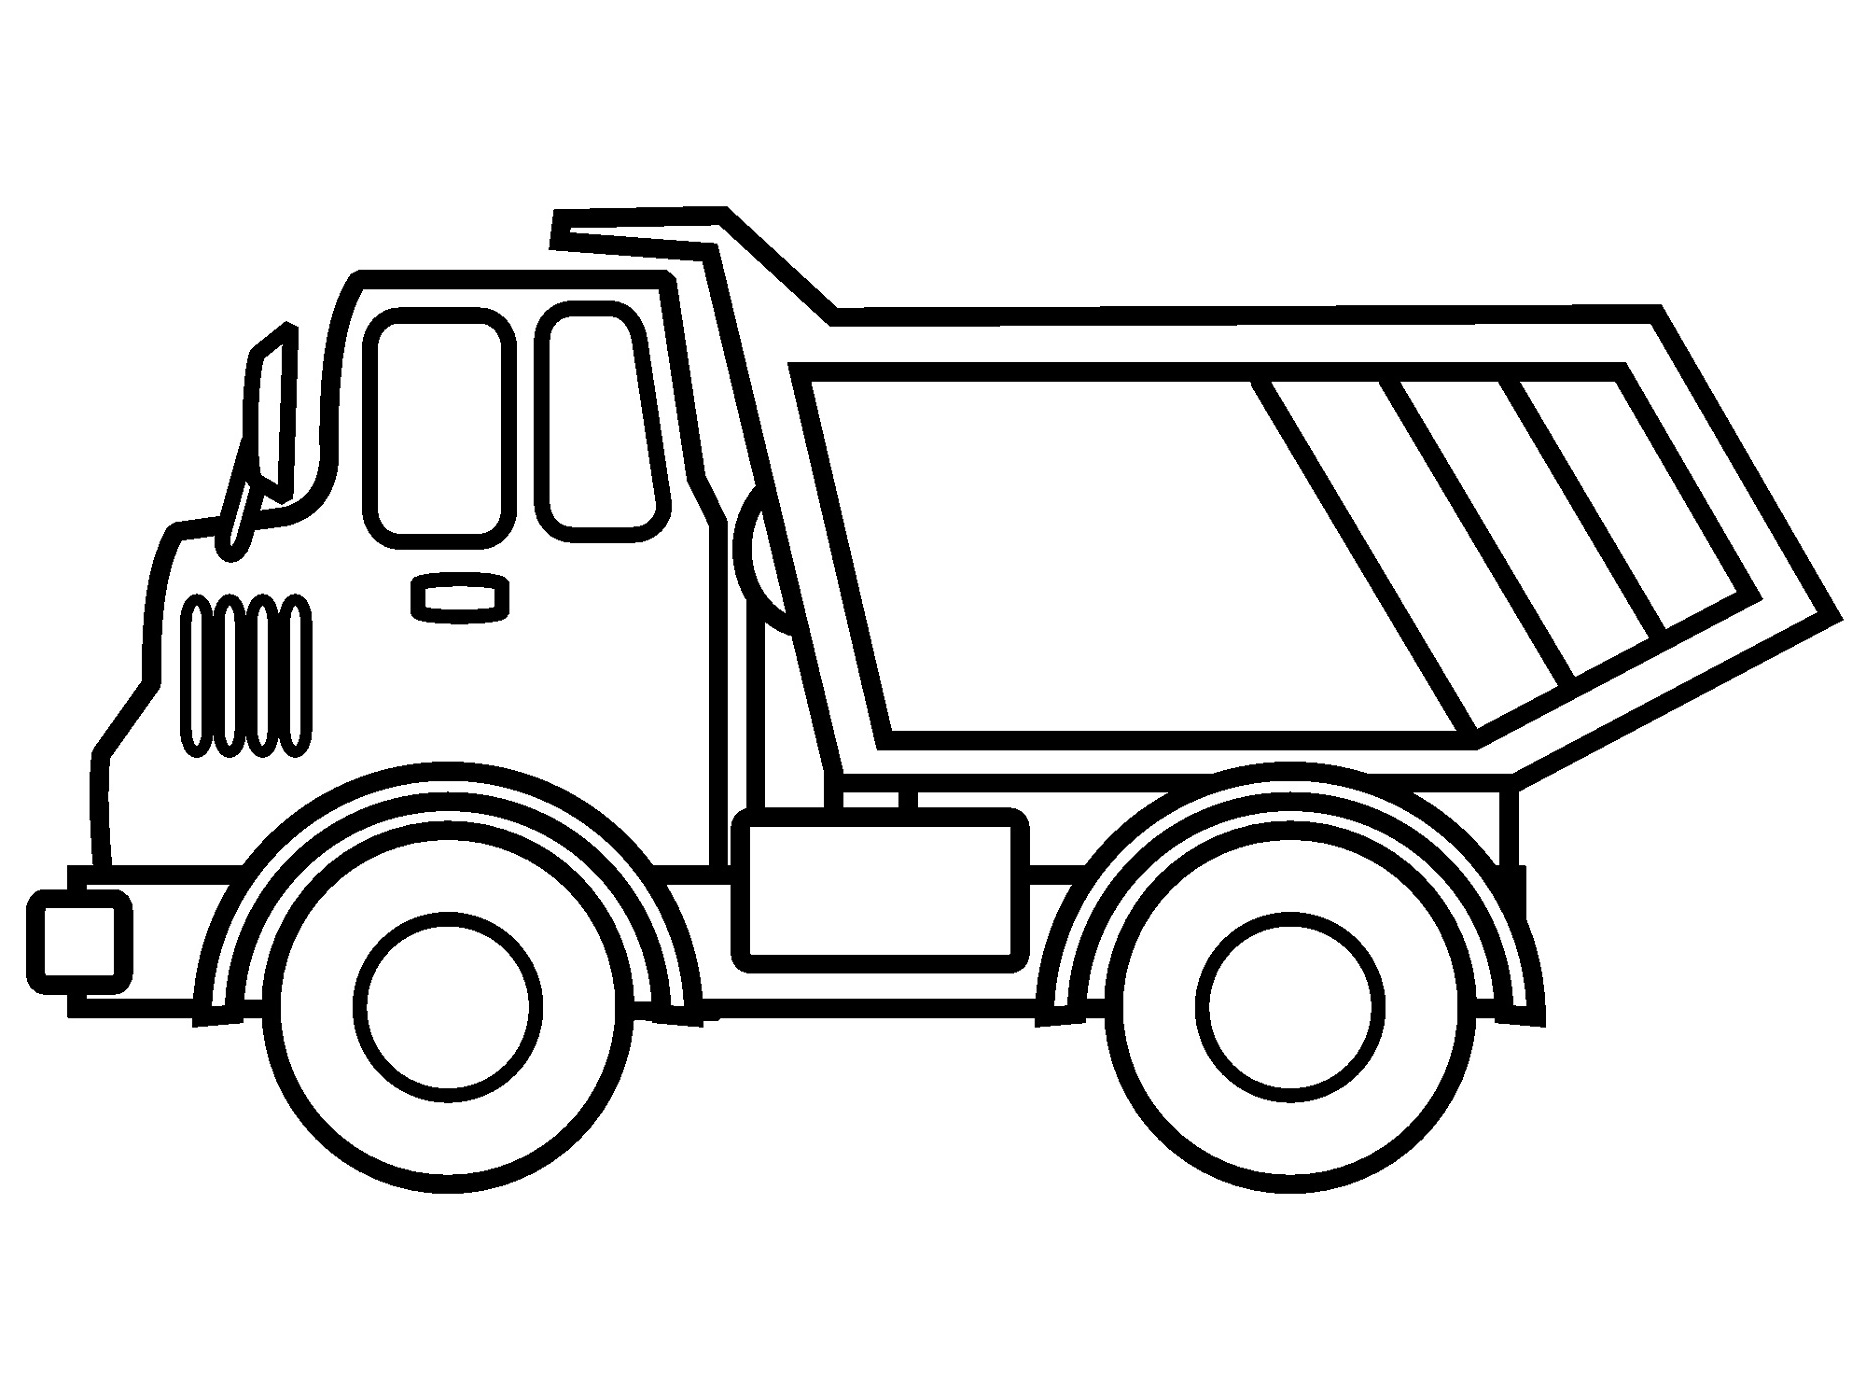 Fascinating Truck Coloring Pages for Kids 101 Activity